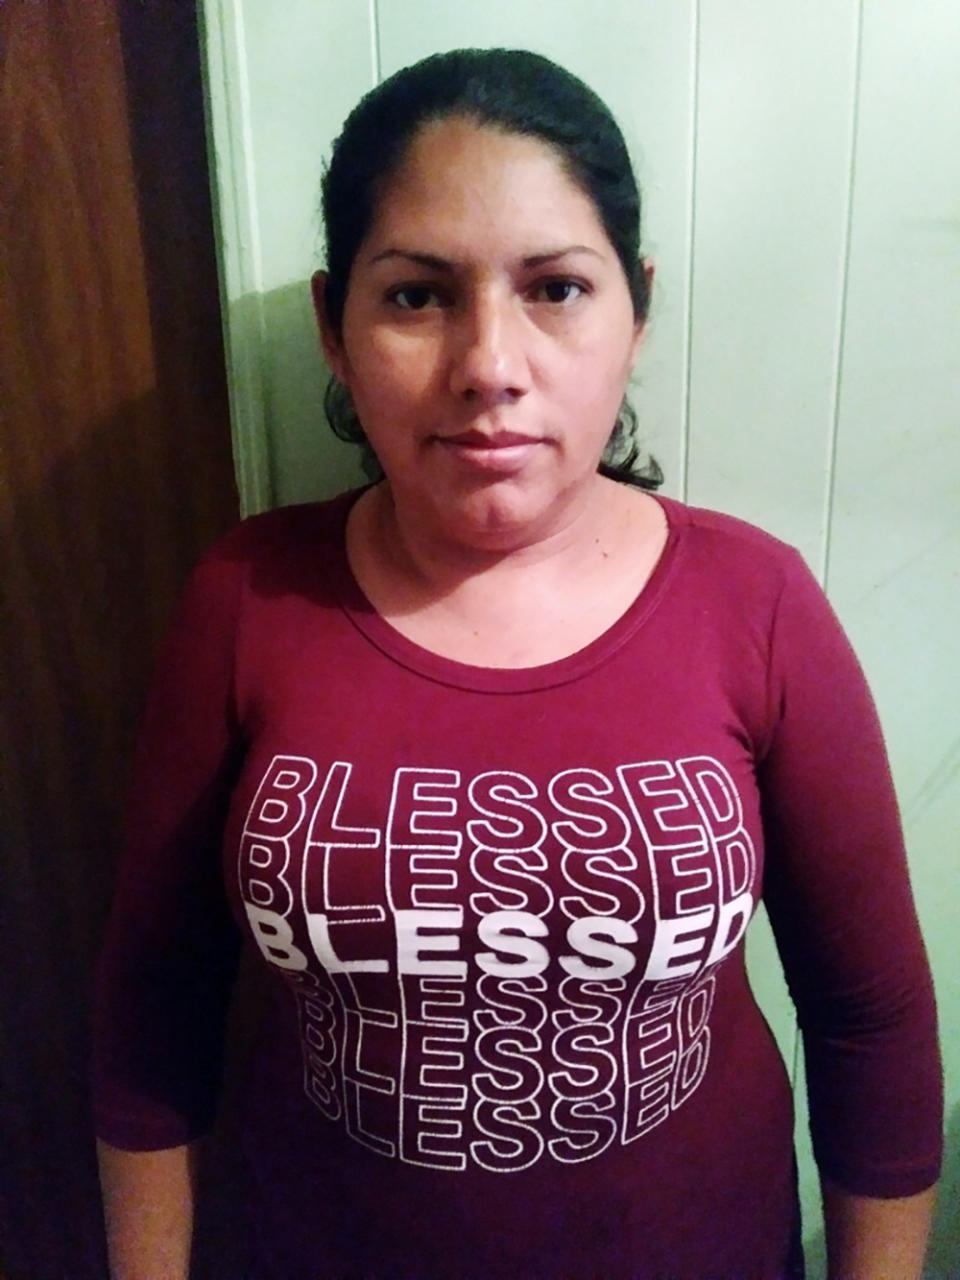 This photo provided by Itza Sanchez shows herself at her home in Richmond, Va., Tuesday, March 31, 2020. Like many people across the U.S., Sanchez says she won’t be able to make April’s rent because she’s out of work as a result of the coronavirus pandemic. (Courtesy of Itza Sanchez via AP)